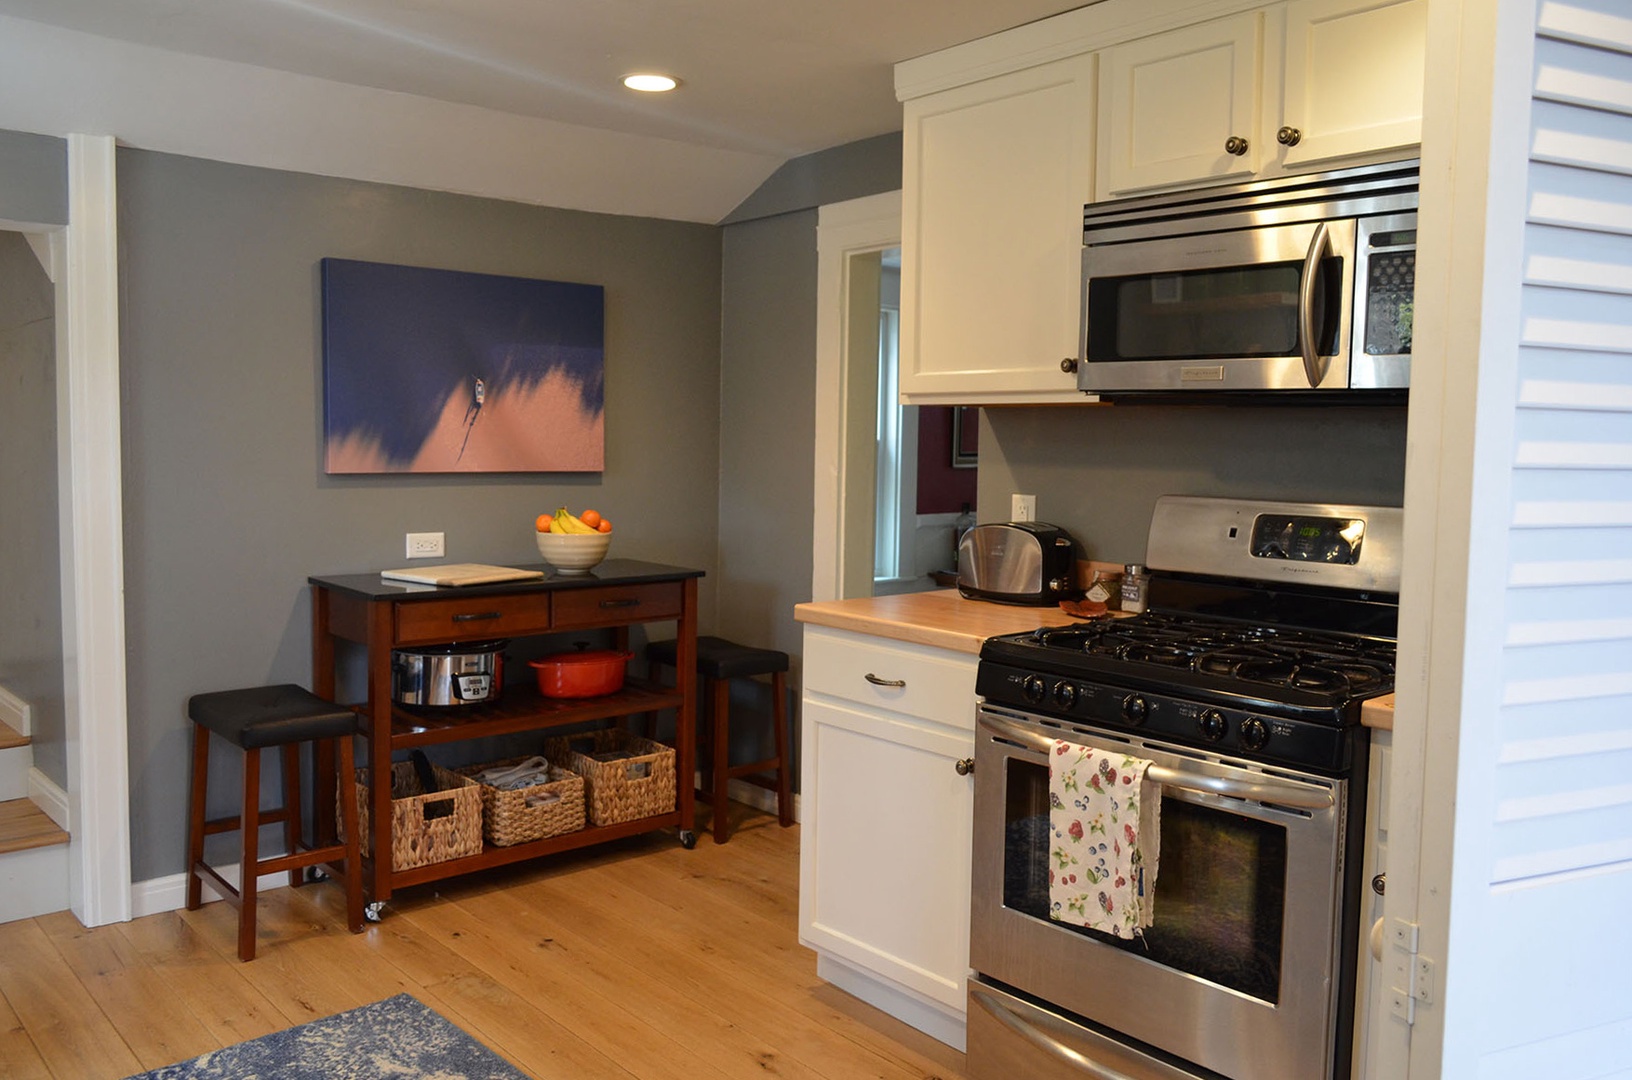 The kitchen has a stainless steel gas stove and microwave.